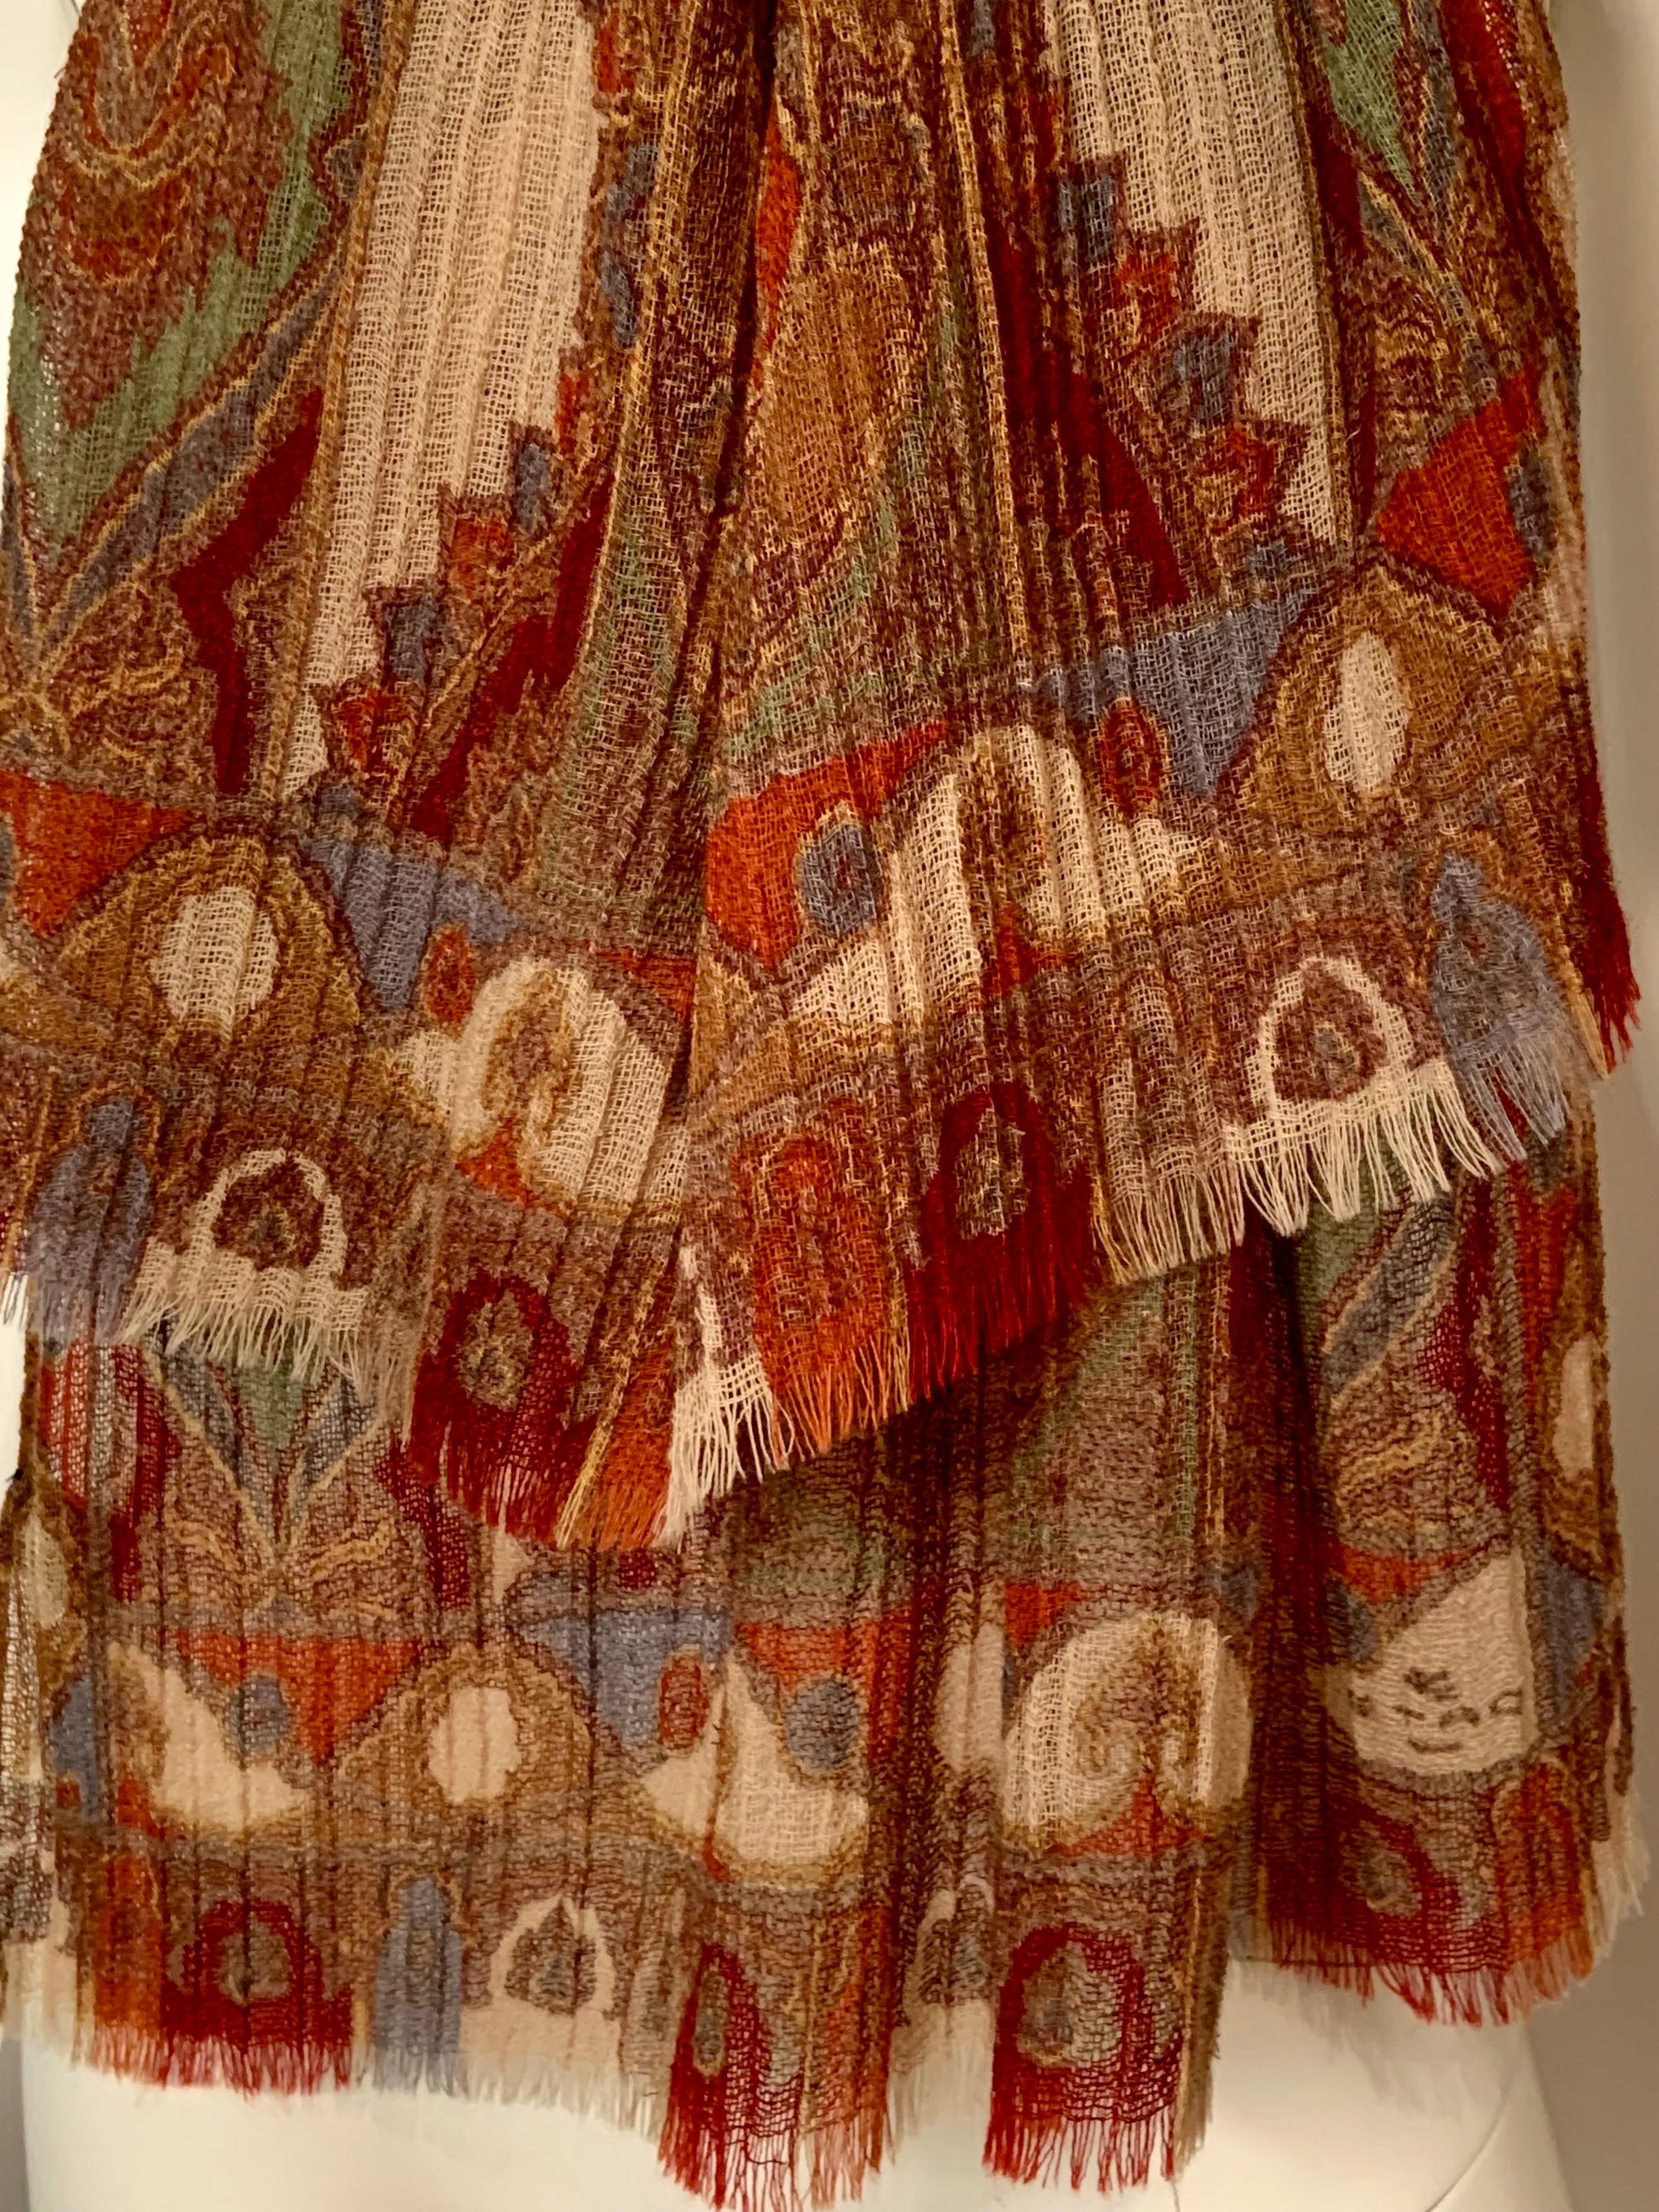 Etro Pleated Wool Paisley Scarf or Shawl In Excellent Condition For Sale In New Hope, PA